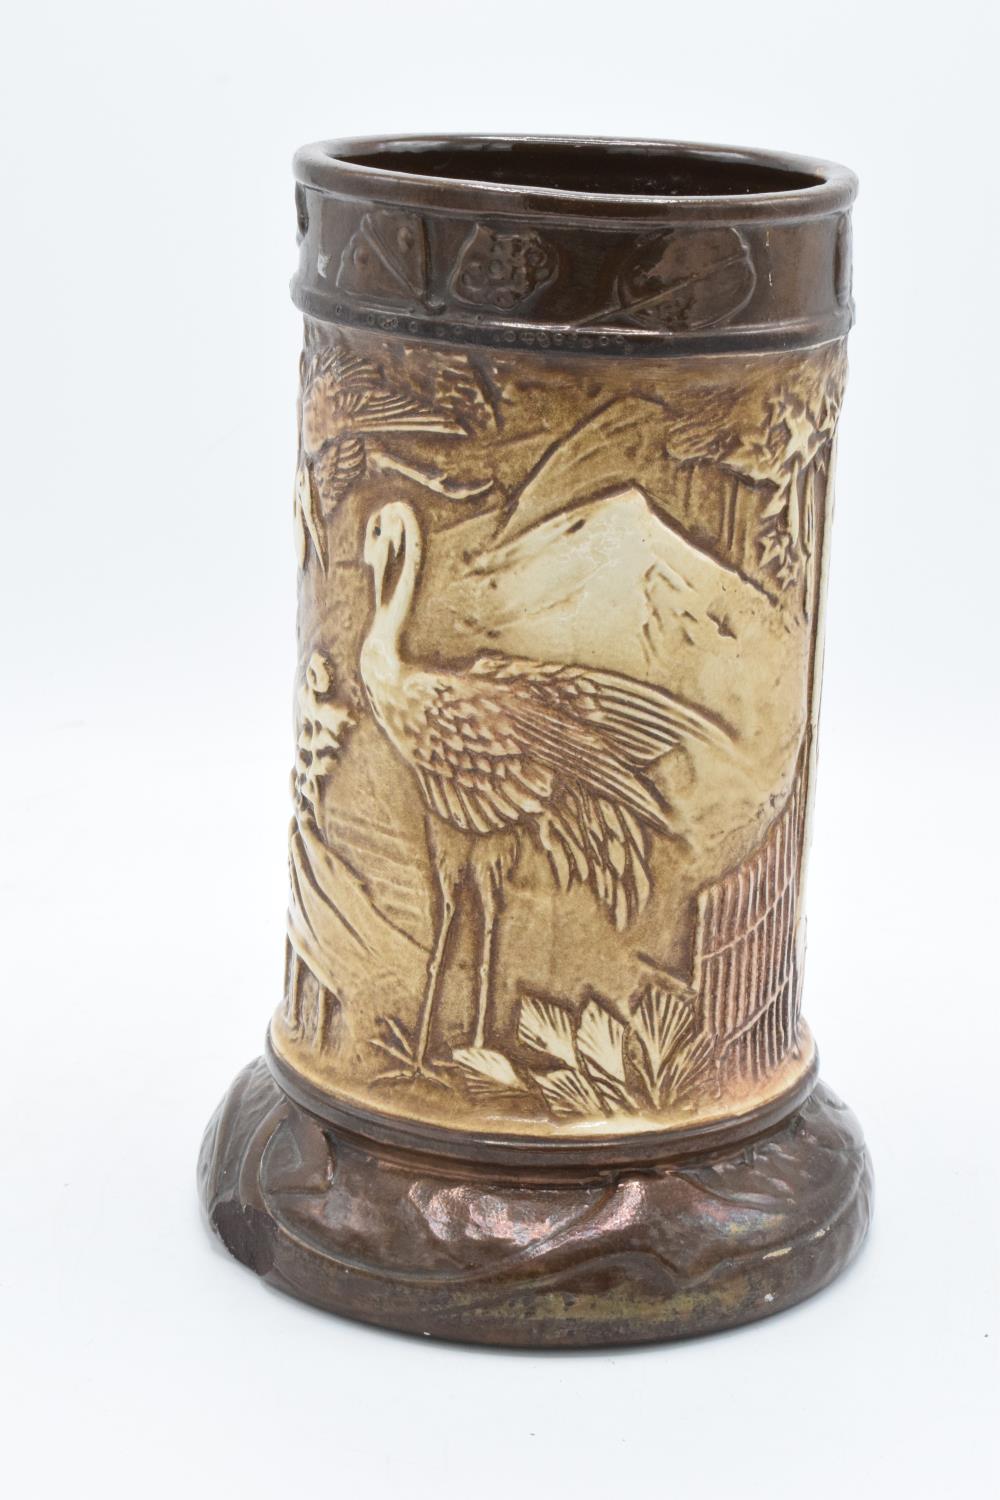 Bretby Pottery large vase in a brown glaze with oriental scenes. Generally it is in alright